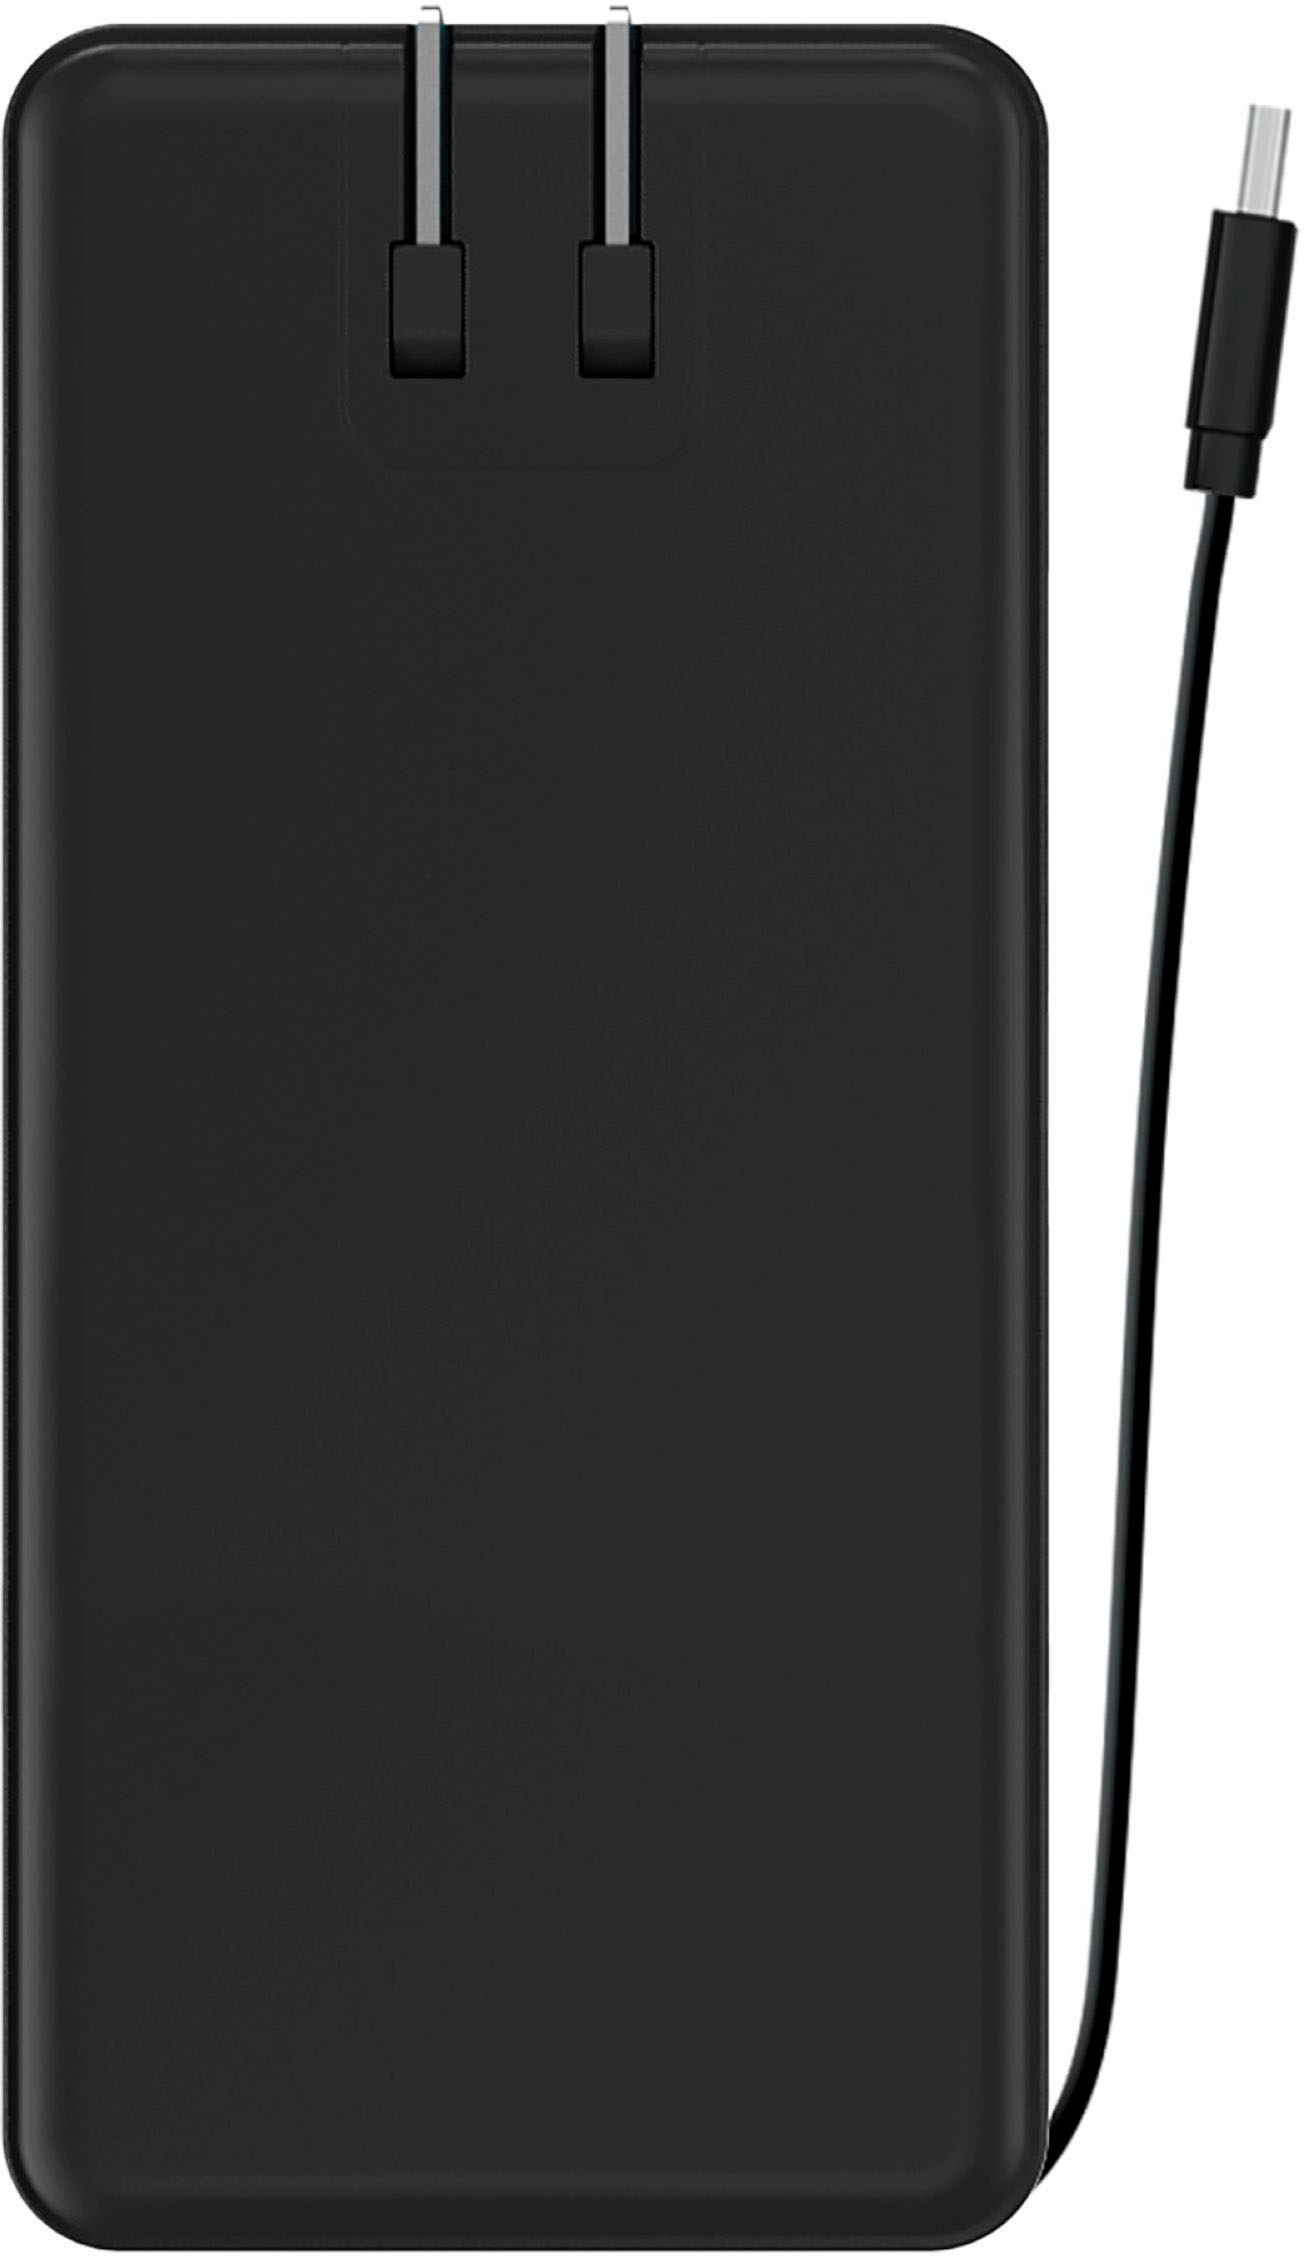 Mycharge Amp Prong Max 20000mAh/12W Output Power Bank with Integrated Charging Cable - Black